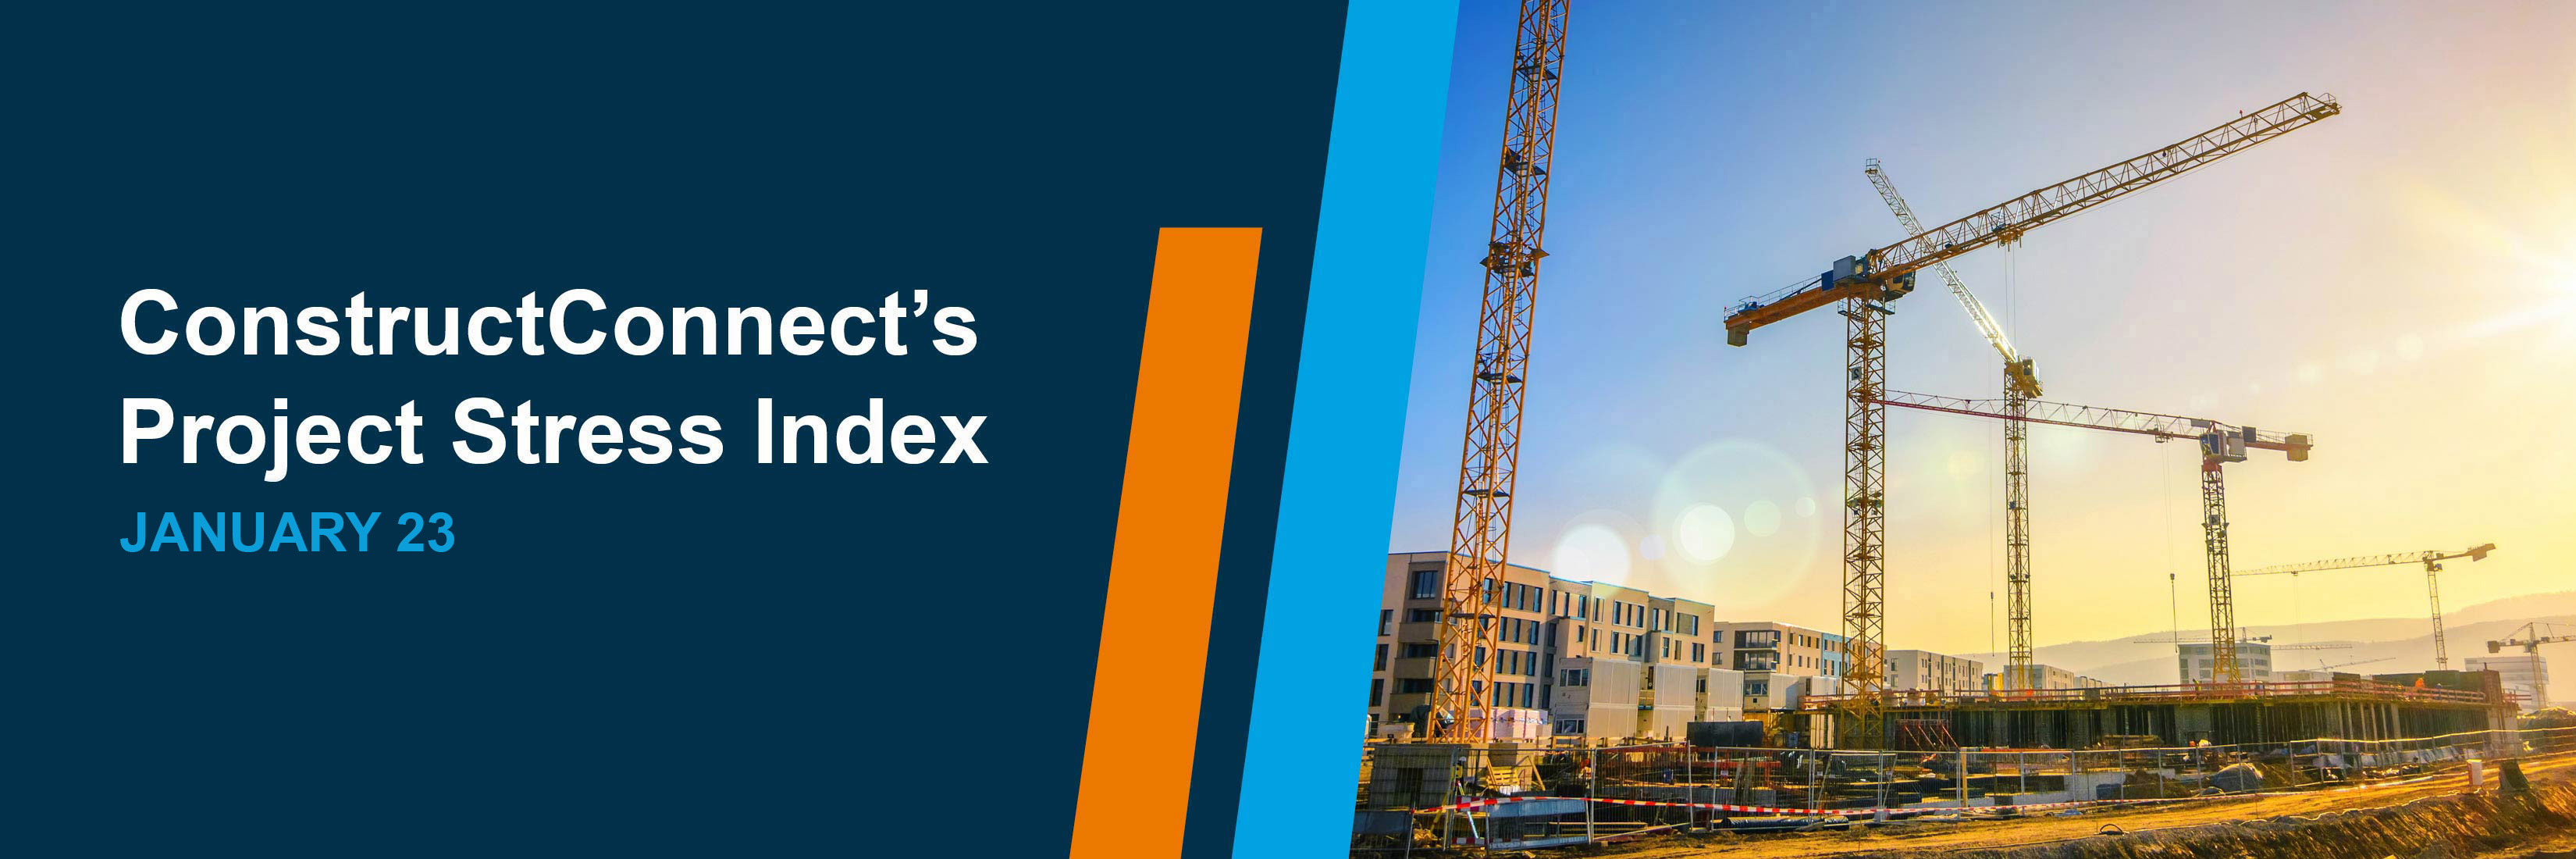 ConstructConnect's Project Stress Index - January 23